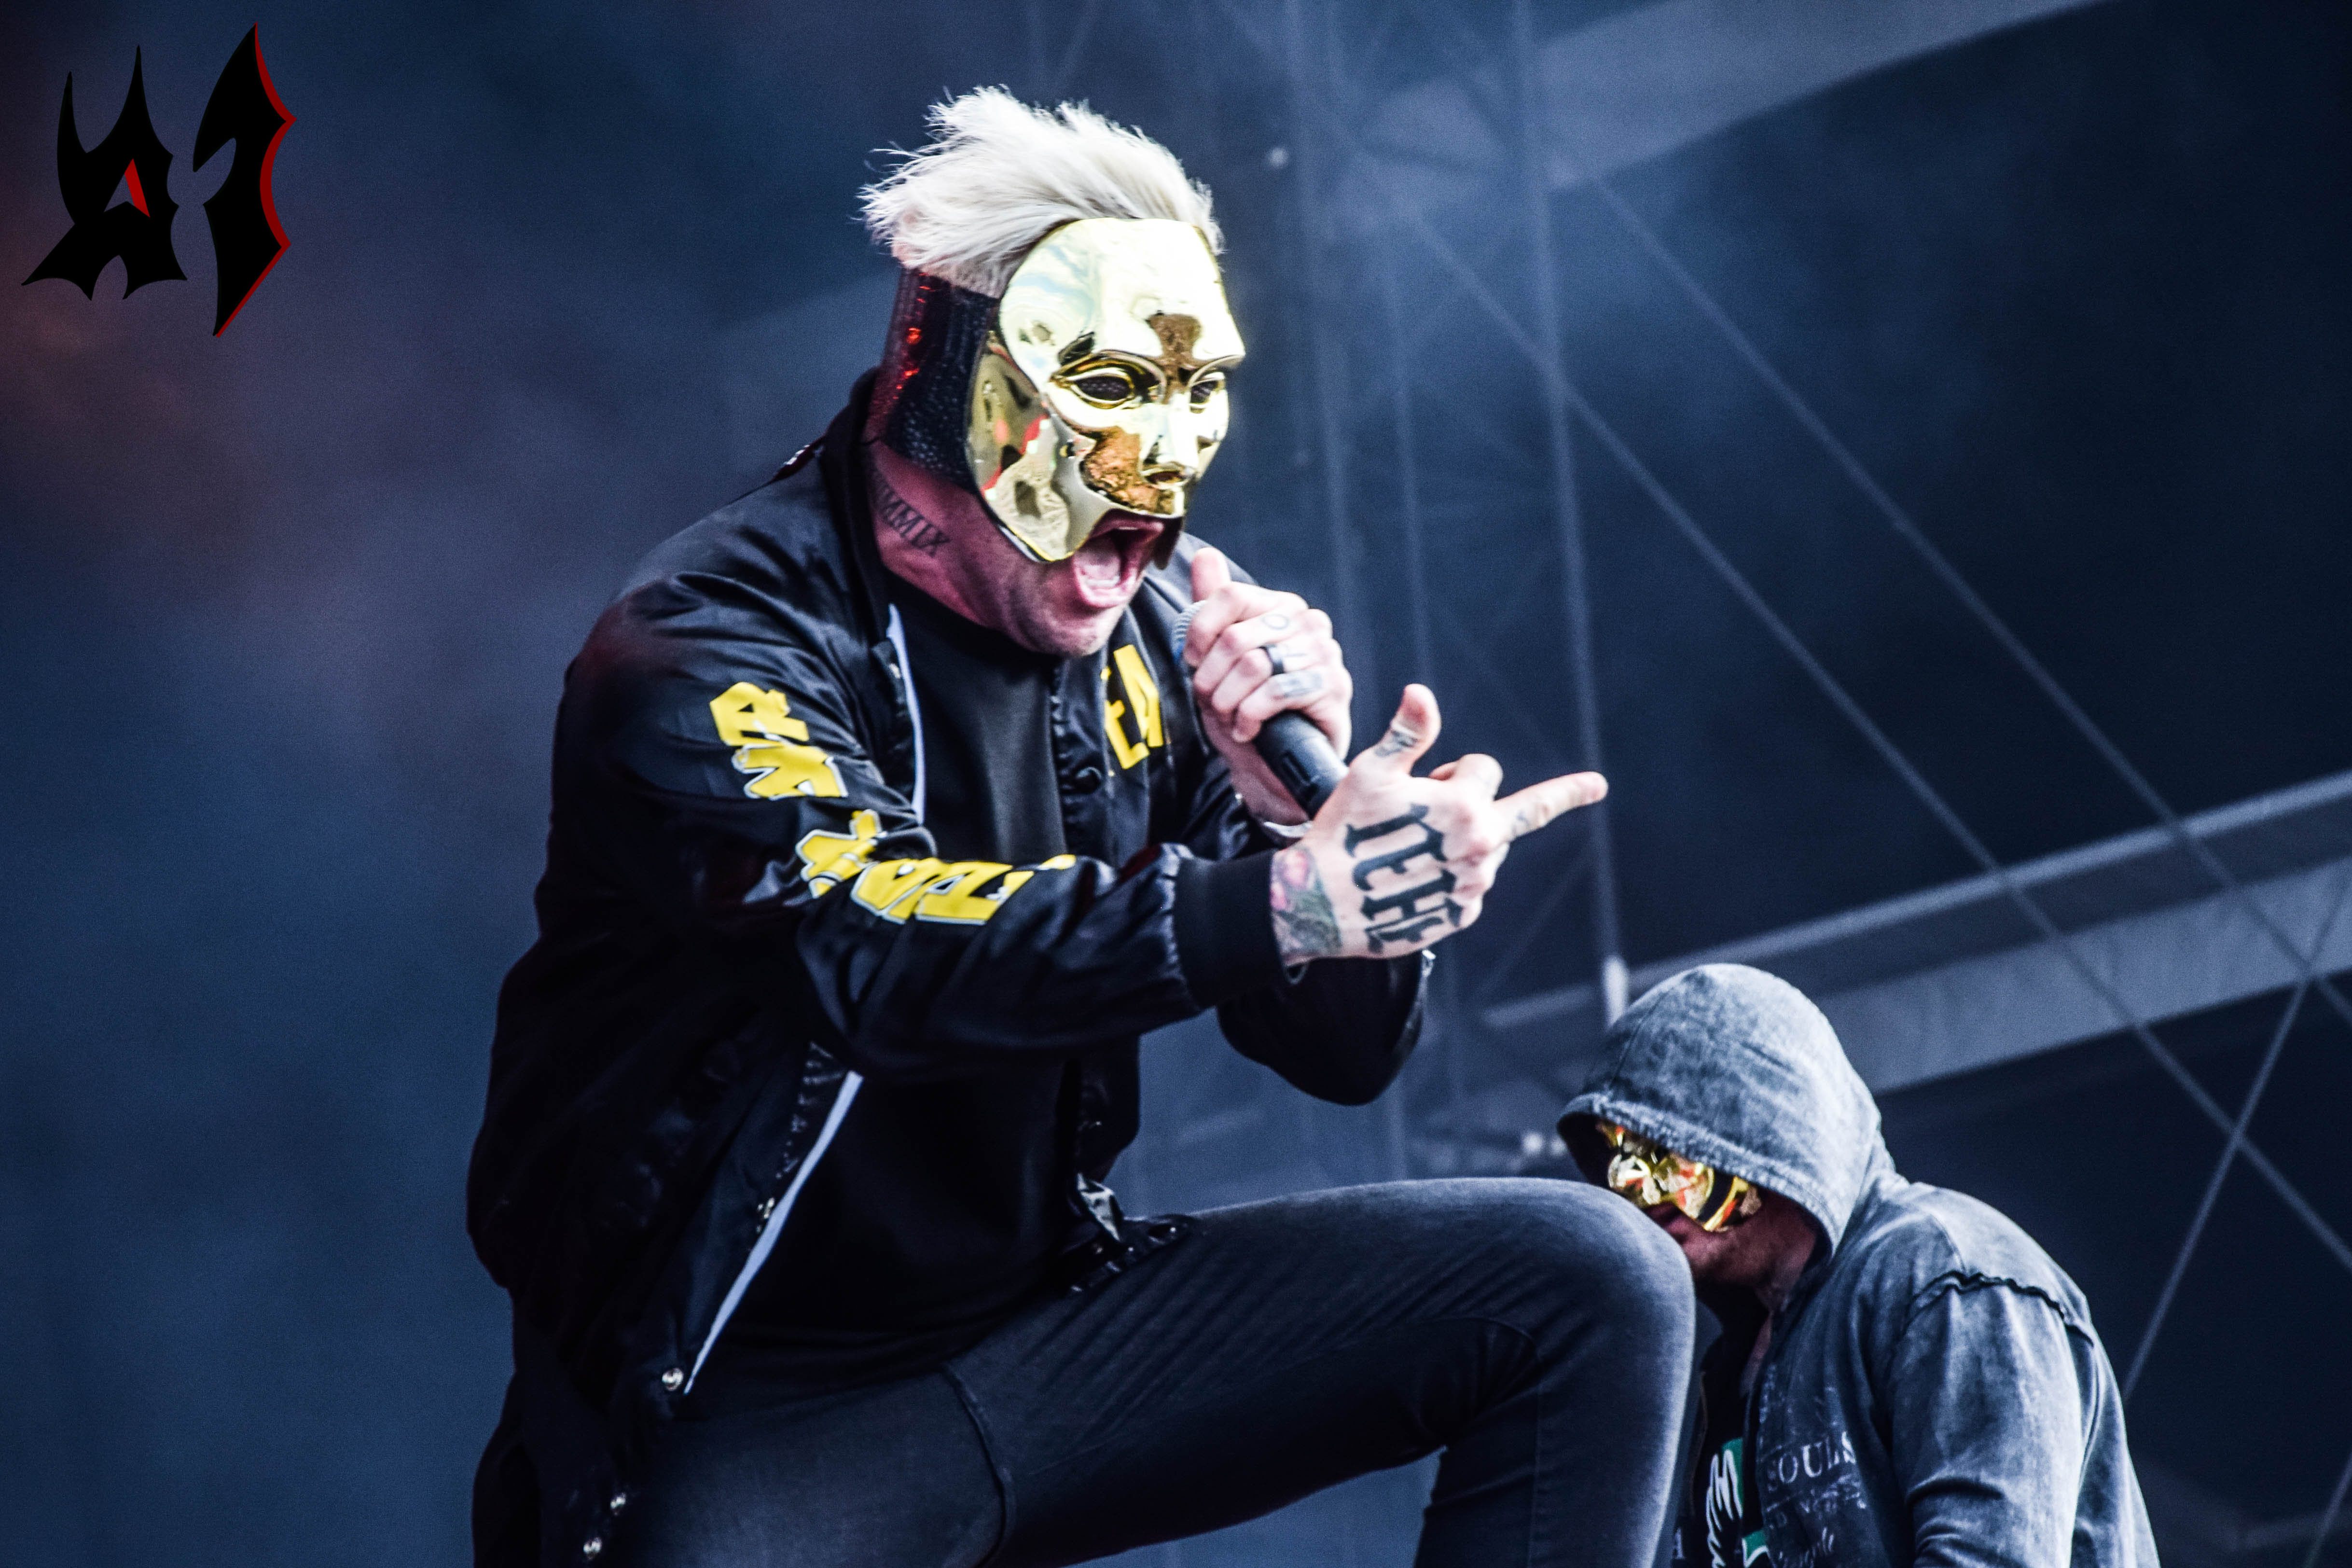 Donwload 2018 – Day 2 - Hollywood Undead 11